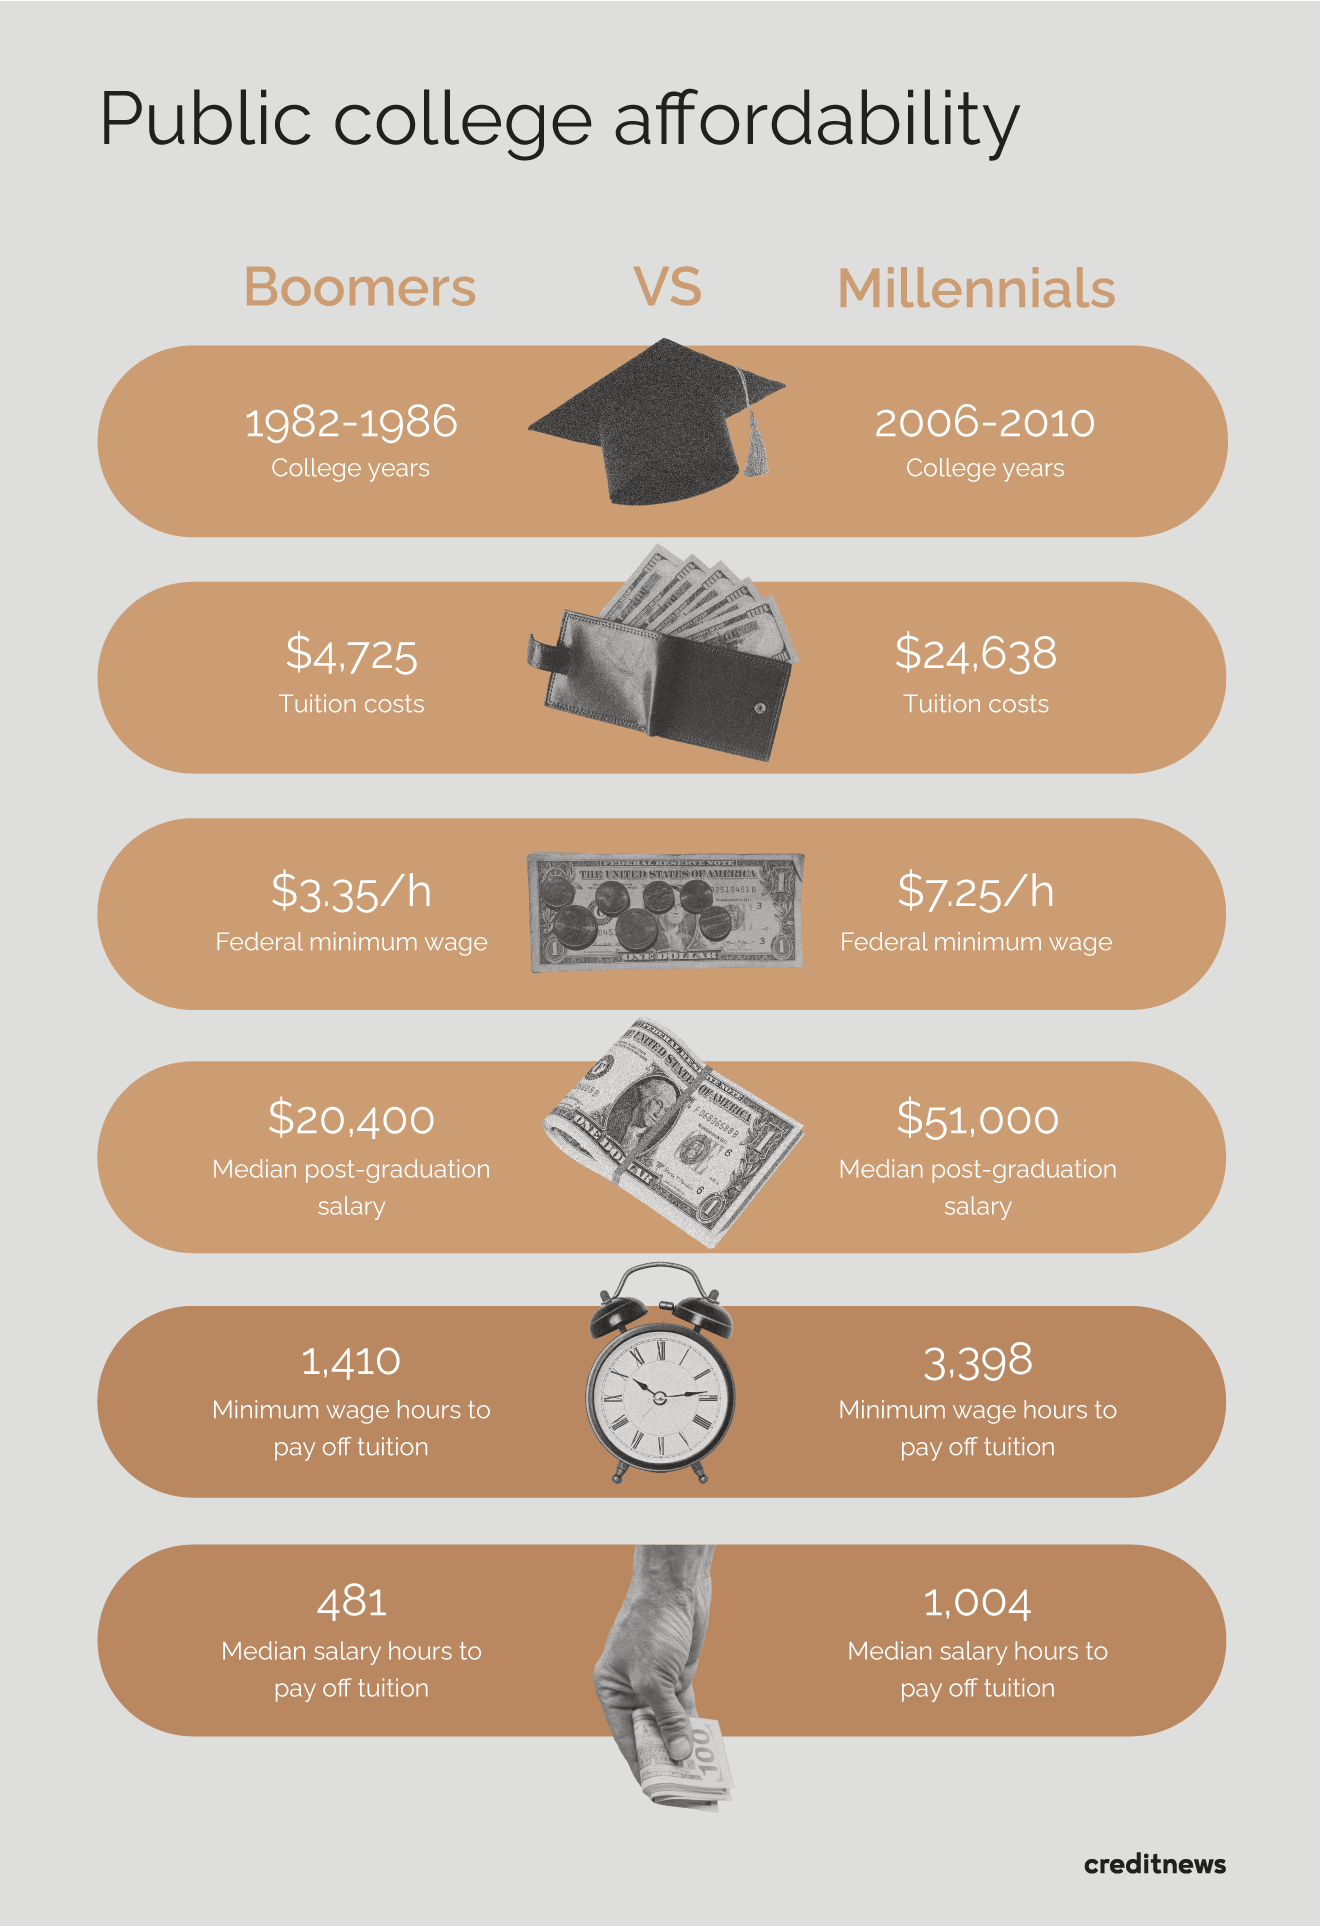 infographic comparing public college statistics for each generation